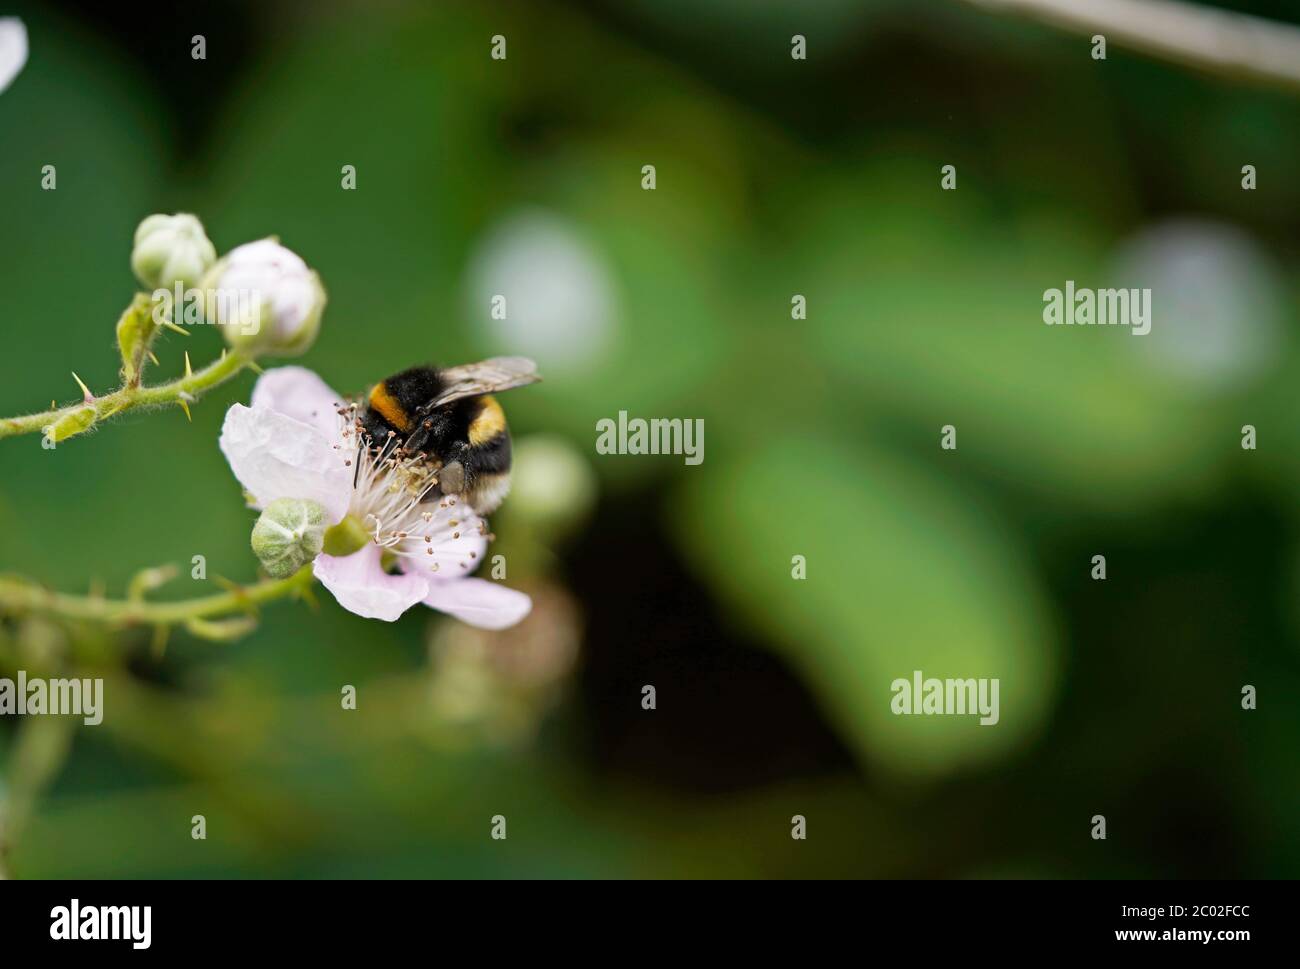 Bumble bee on a blackberry flower, green blurred background Stock Photo